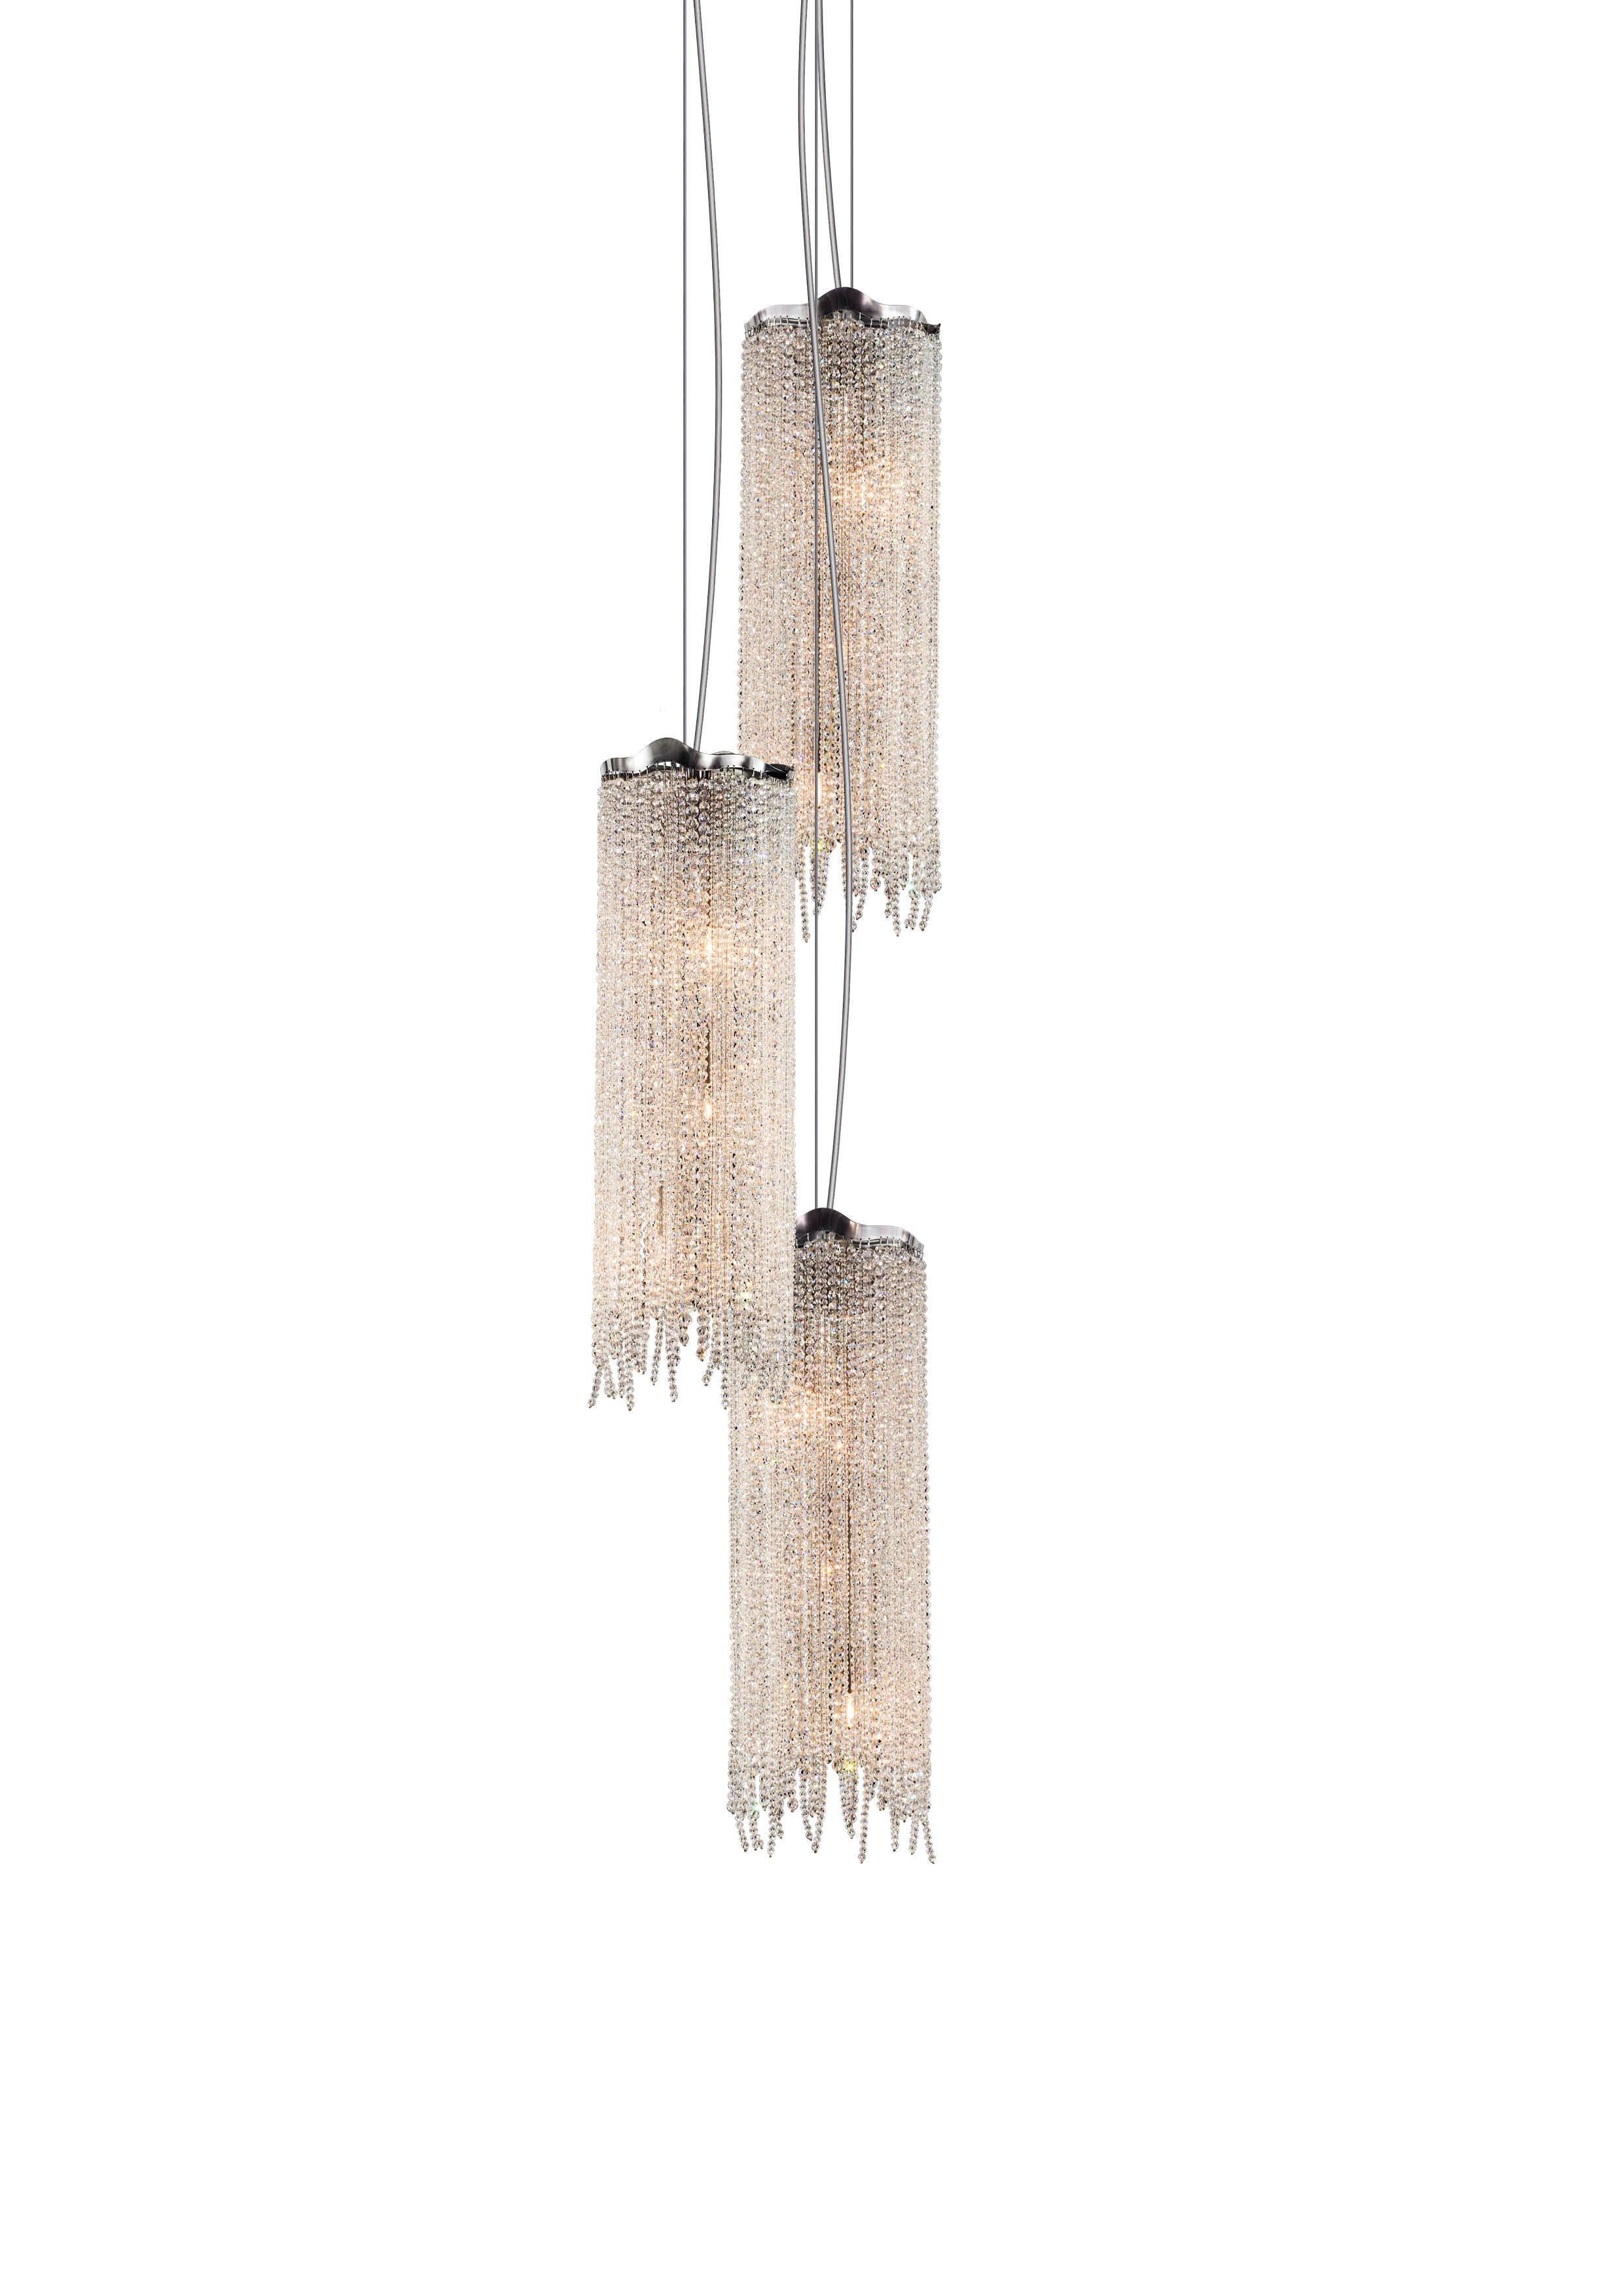 This modern pendant in a nickel finish with crystals is part of the Victoria collection, designed by William Brand of Brand van Egmond and can be used as a single lighting element or in a composition.

Before you see it, the sparkling light